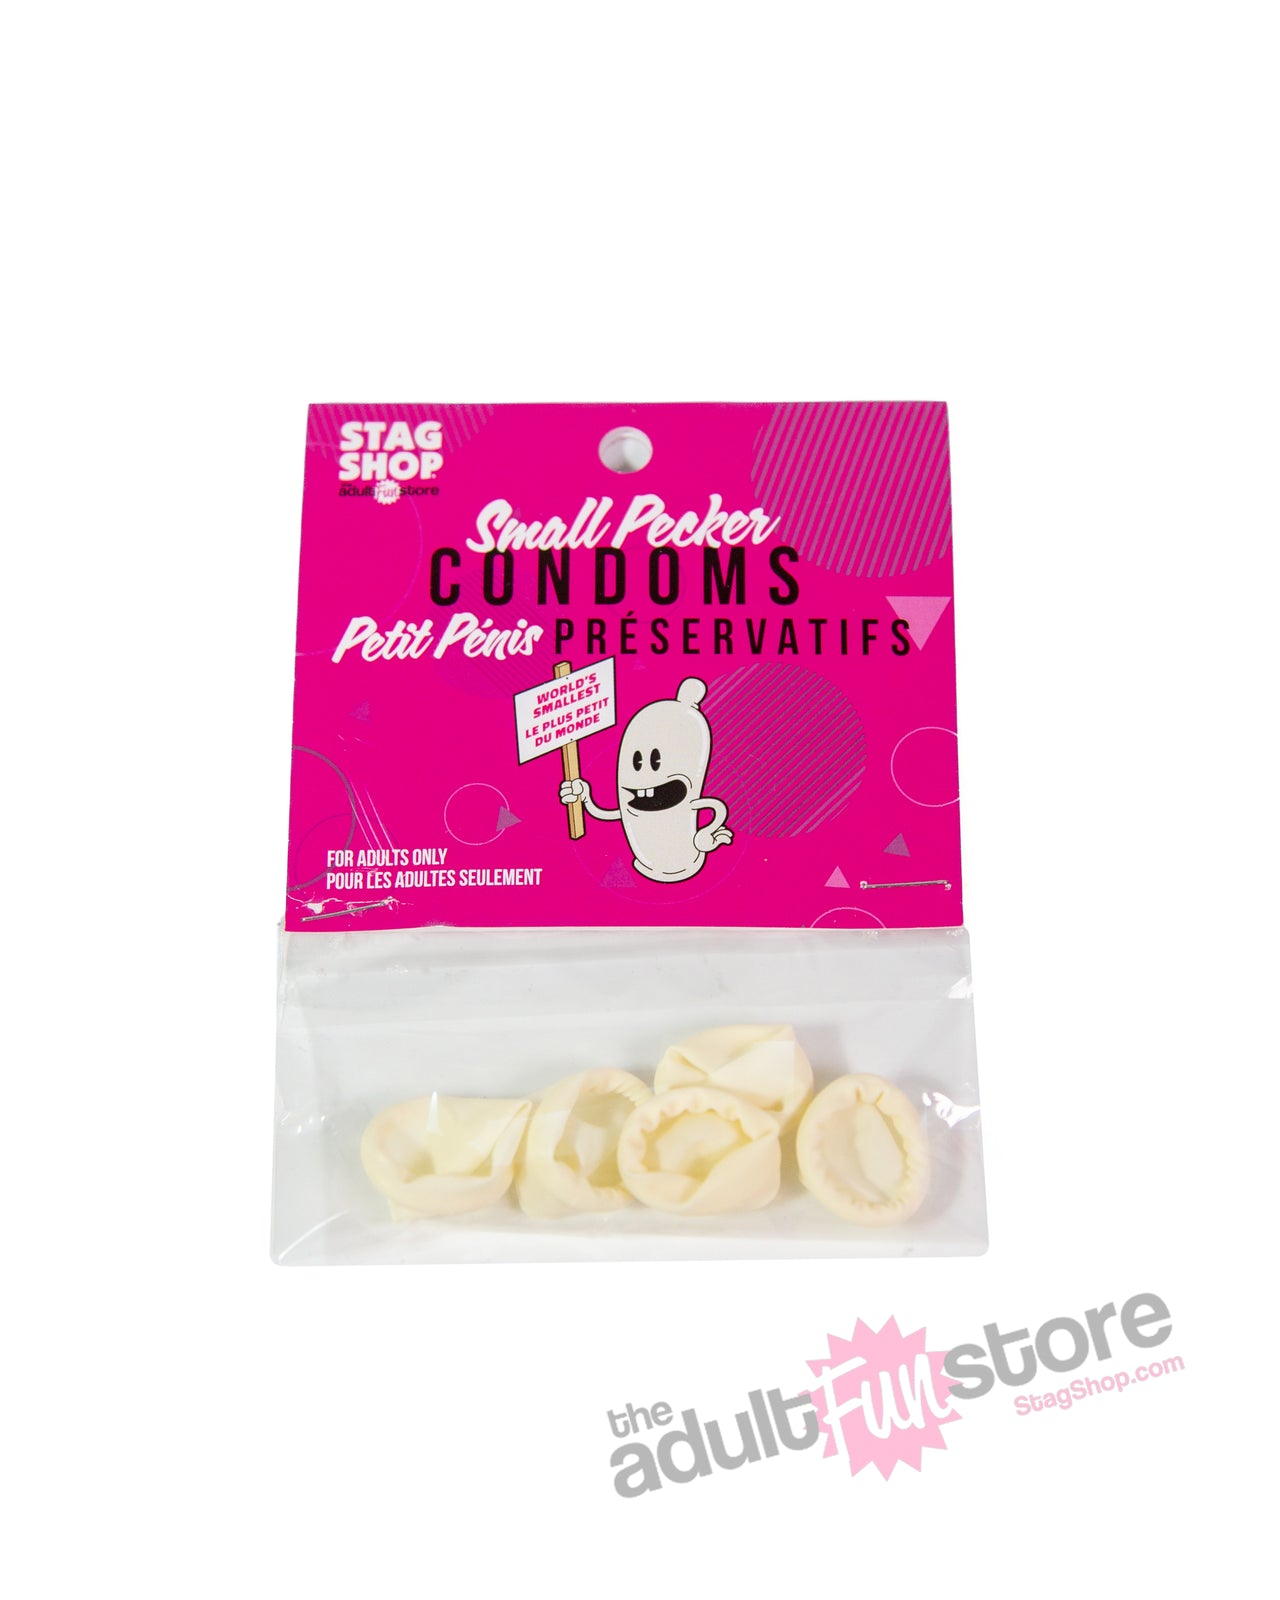 Stag Shop - Small Pecker Novelty Condoms - Stag Shop